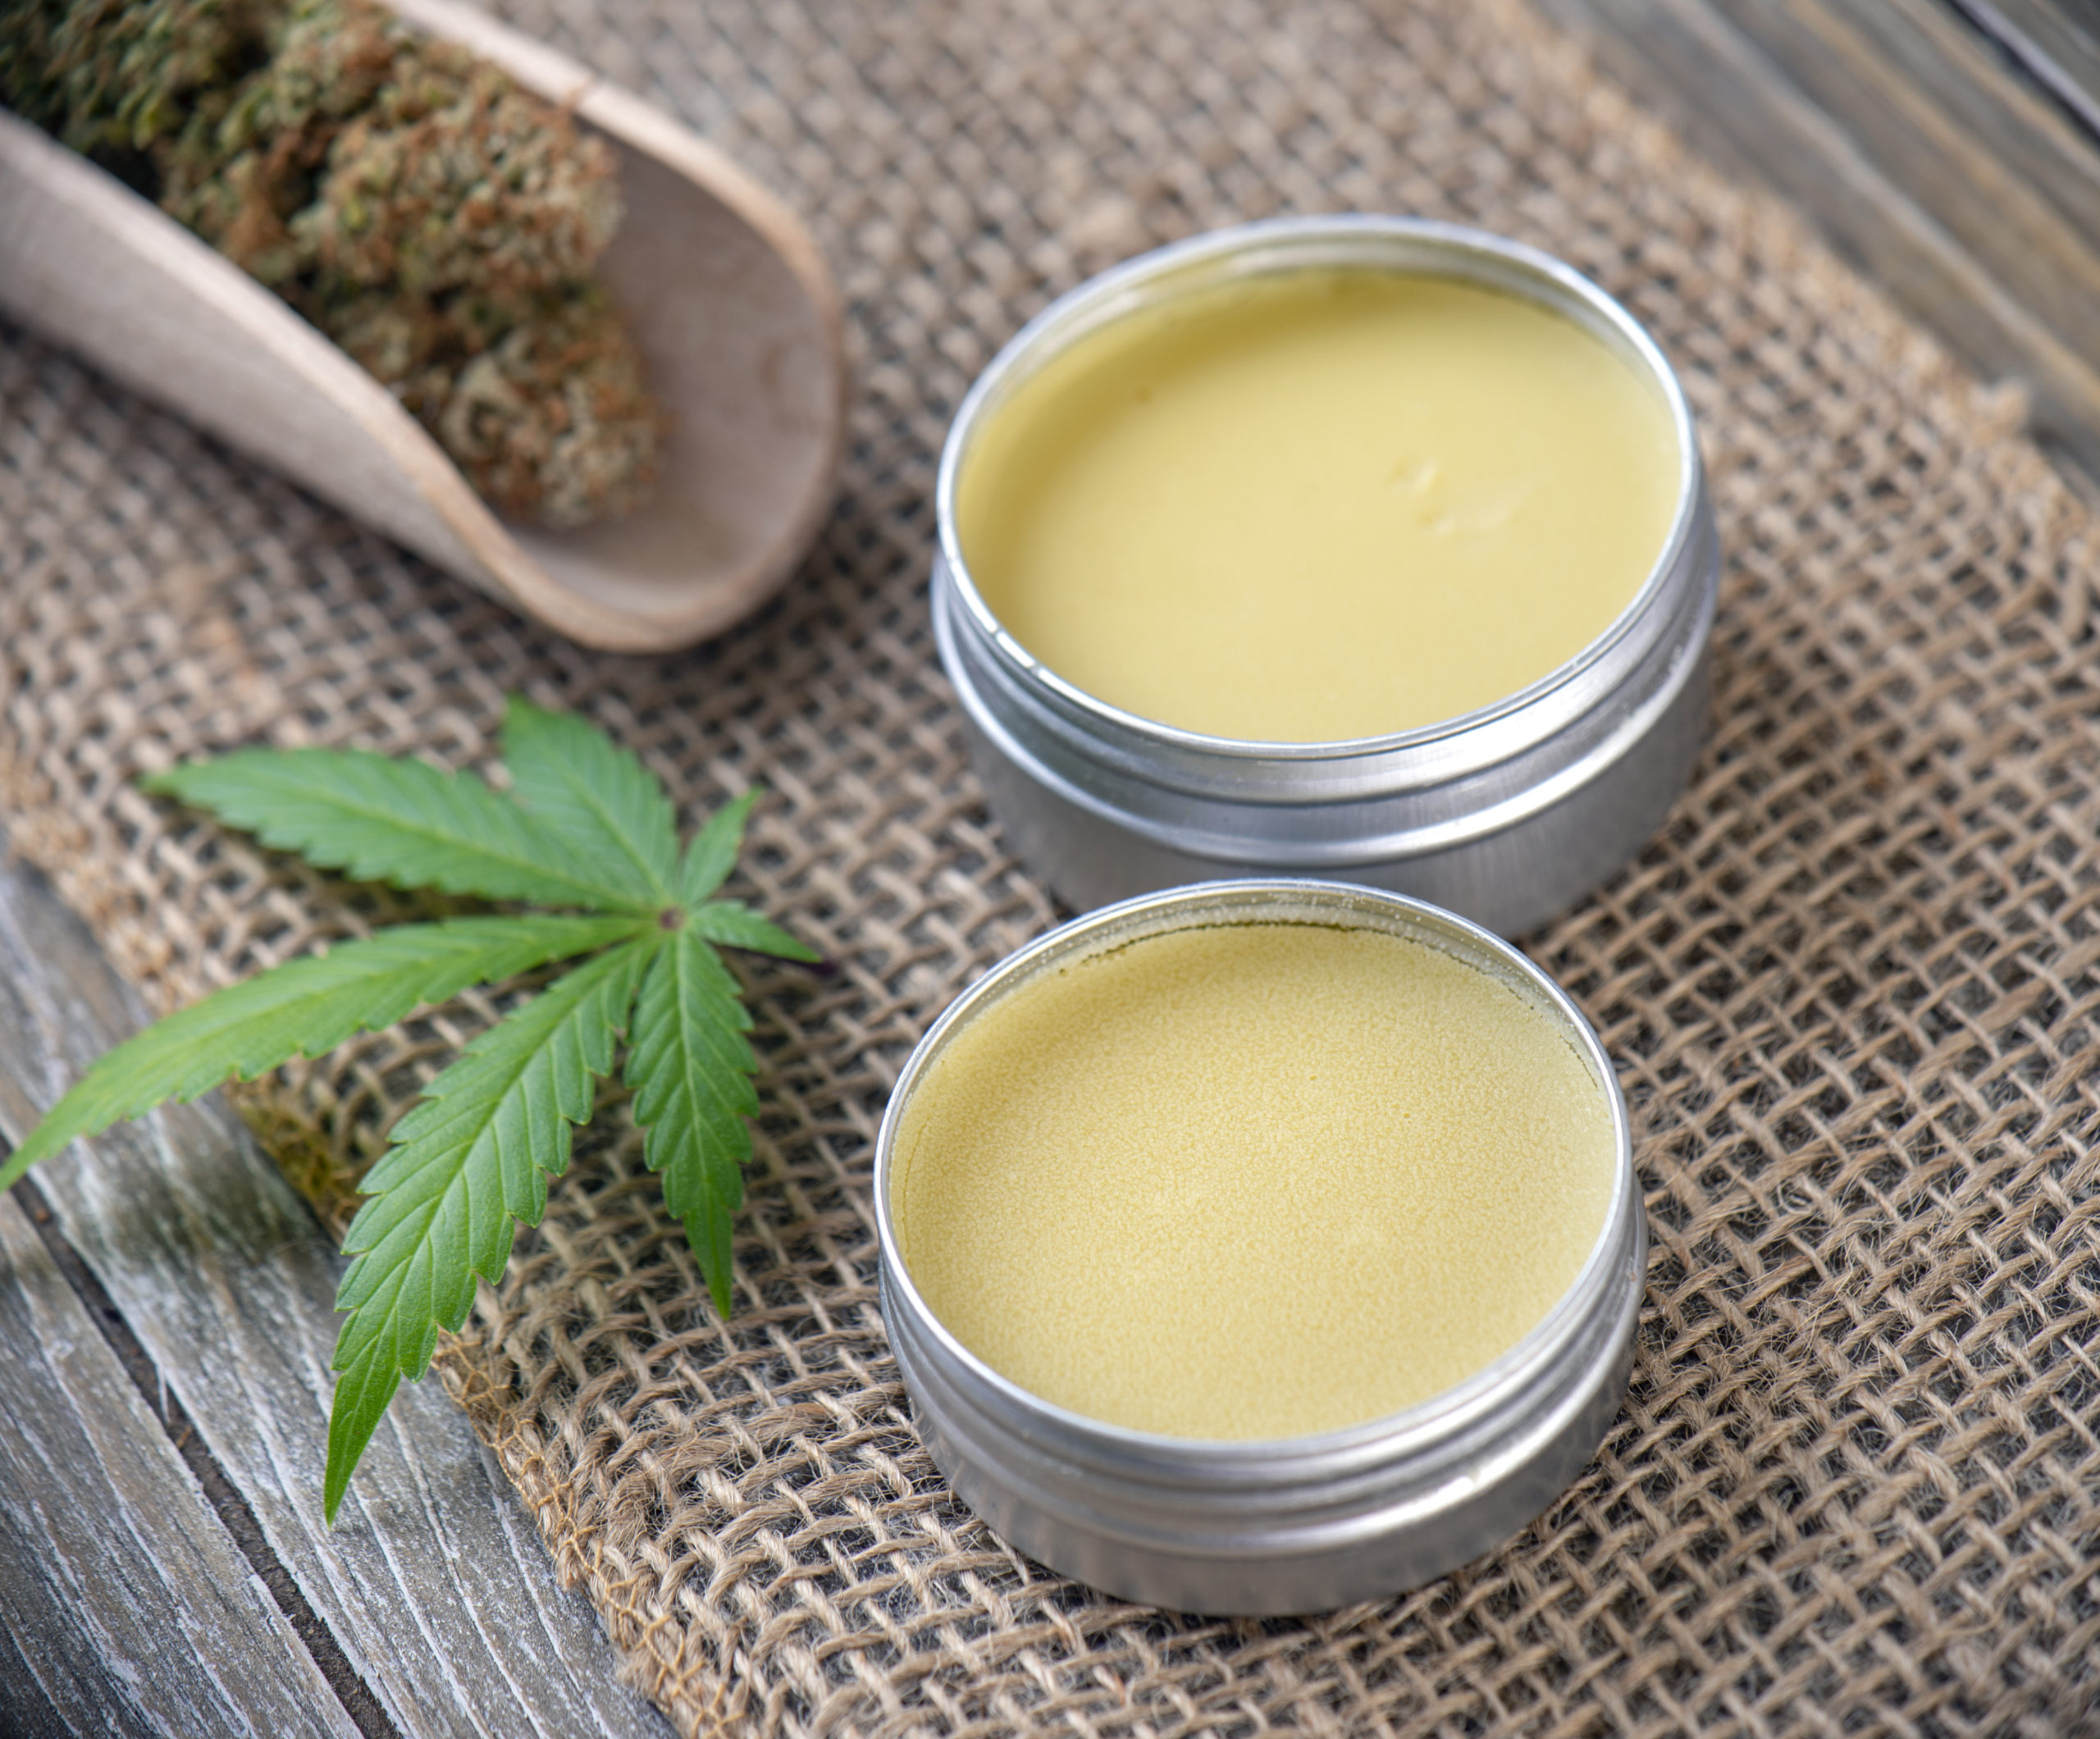 Are CBD skincare products effective? (Dermatology Times)